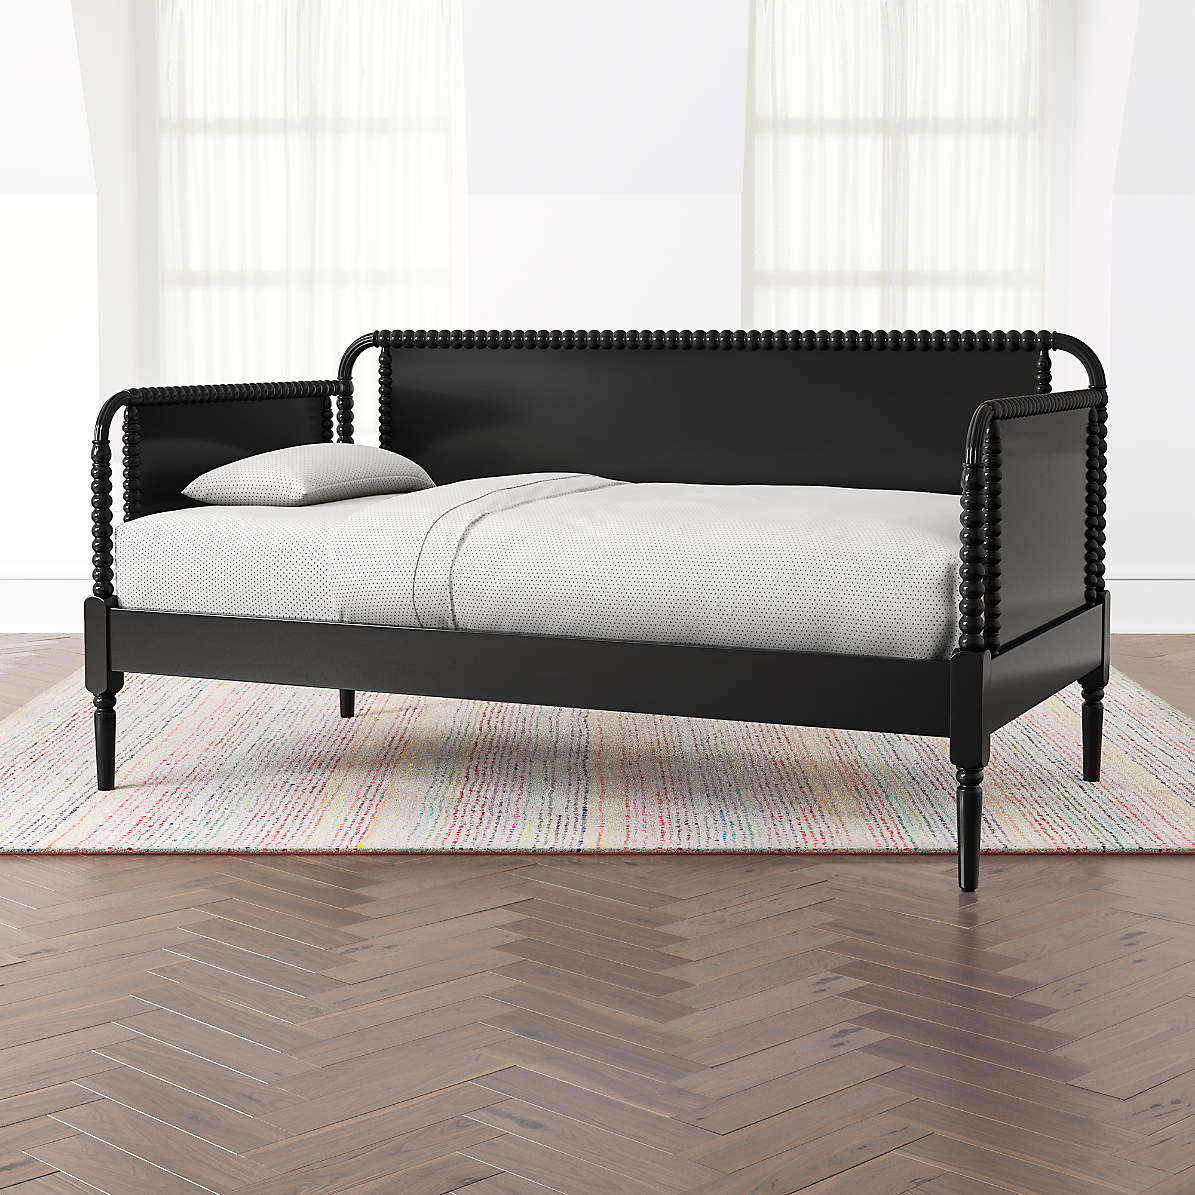 Jenny Lind Black Daybed Reviews Crate And Barrel